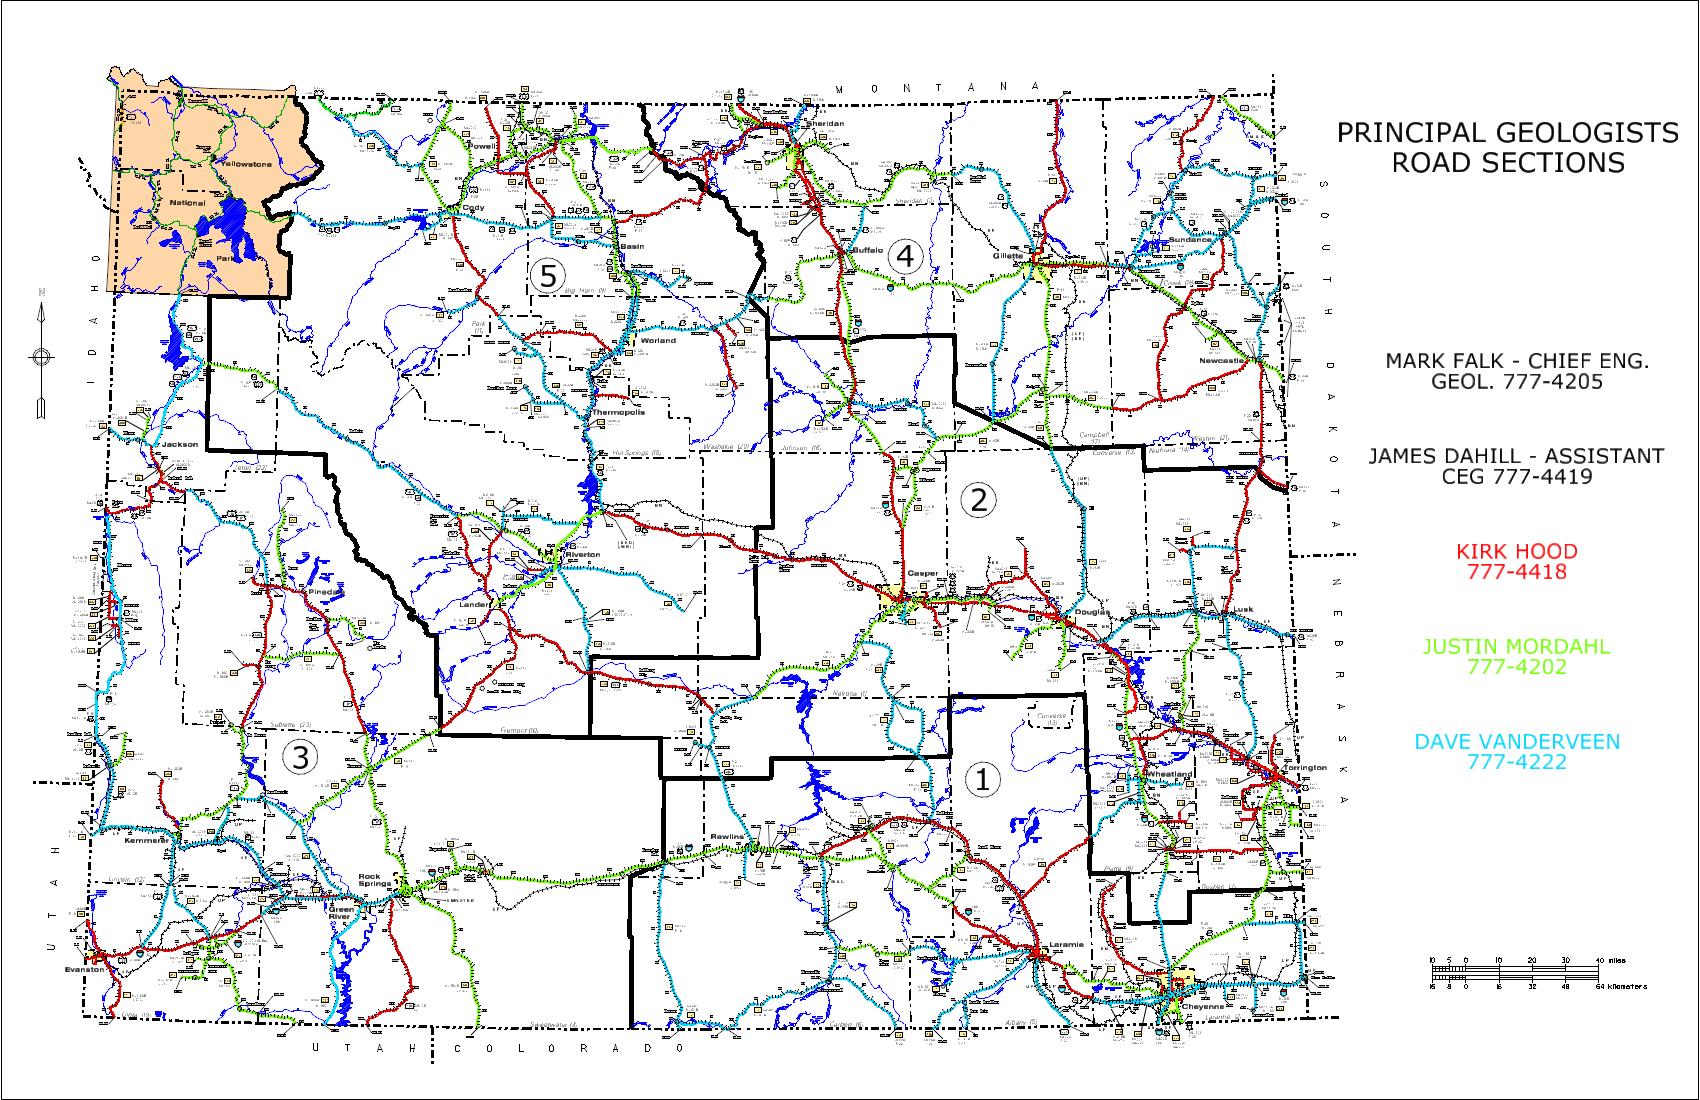 /files/live/sites/wydot/files/shared/Geology/PG%20section%20map.11x17.jpg